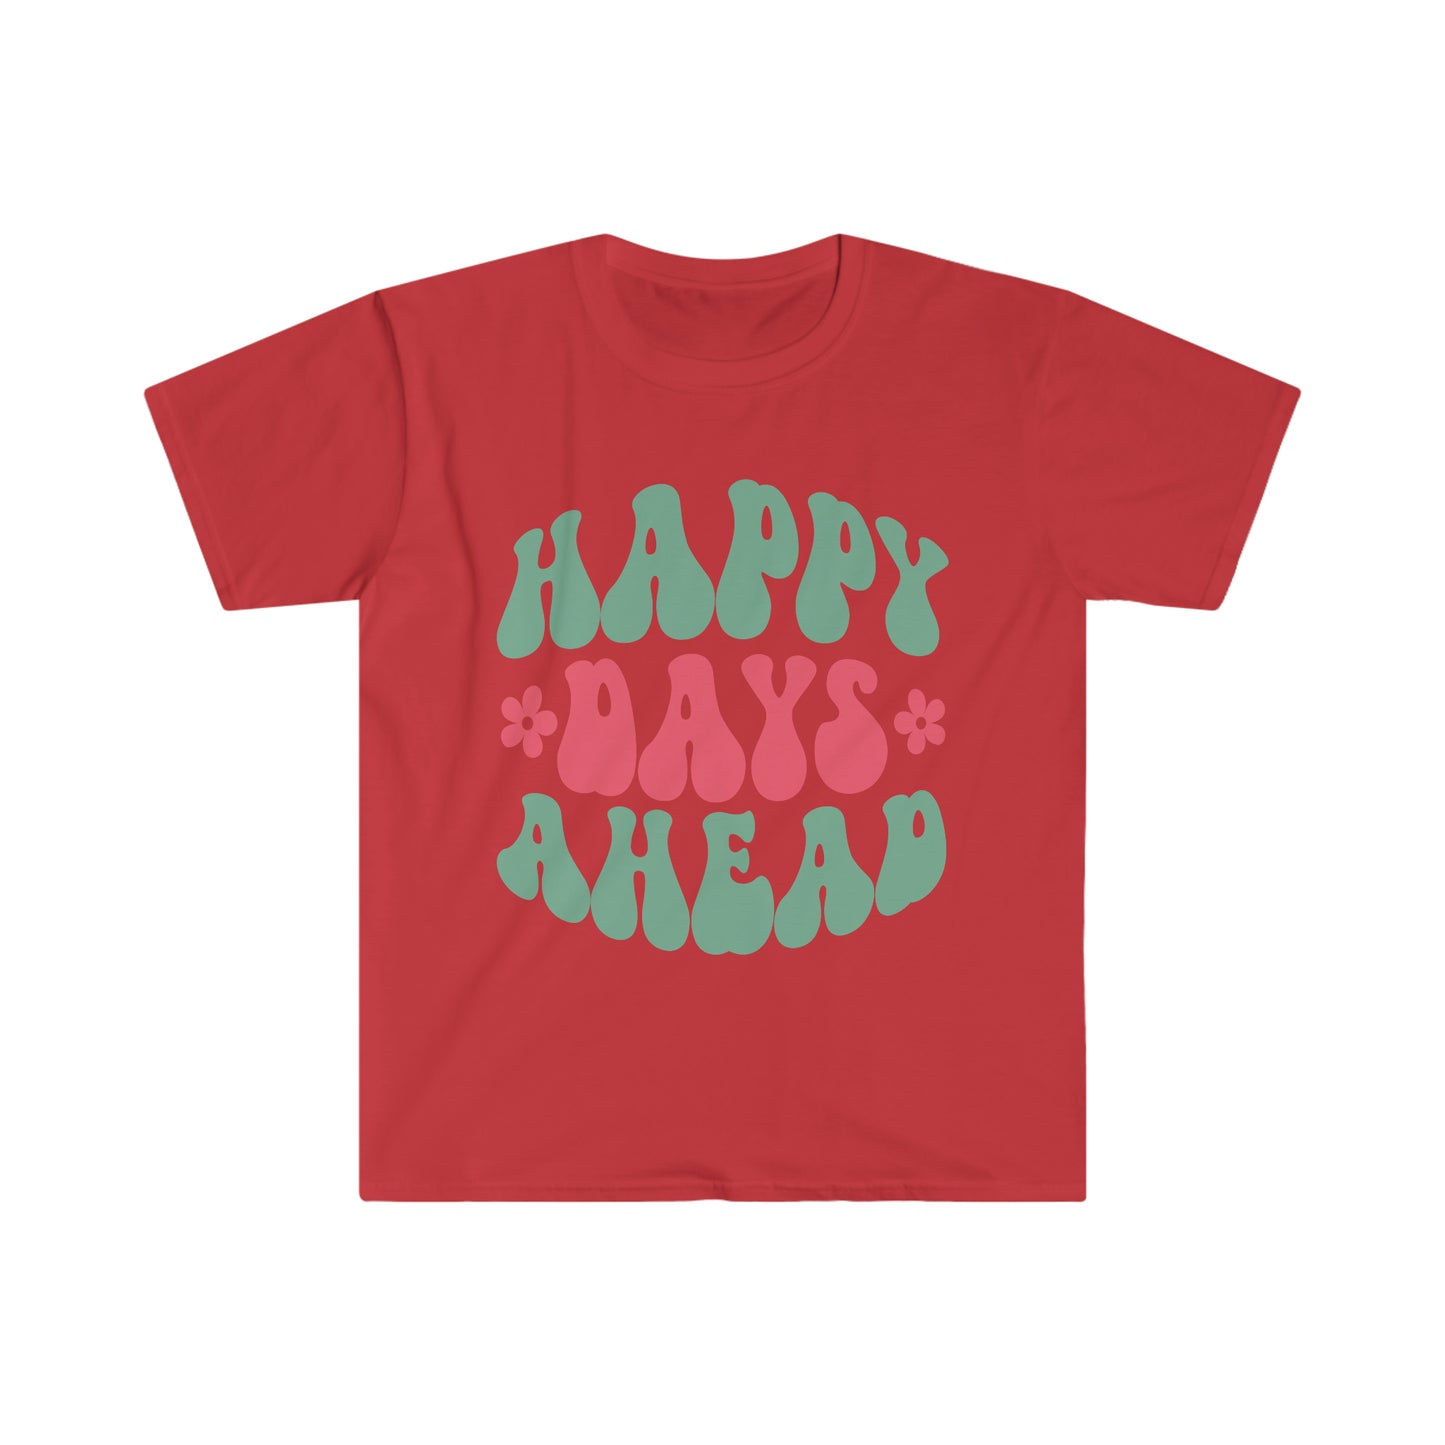 Happy Days Ahead - Unisex Softstyle T-Shirt